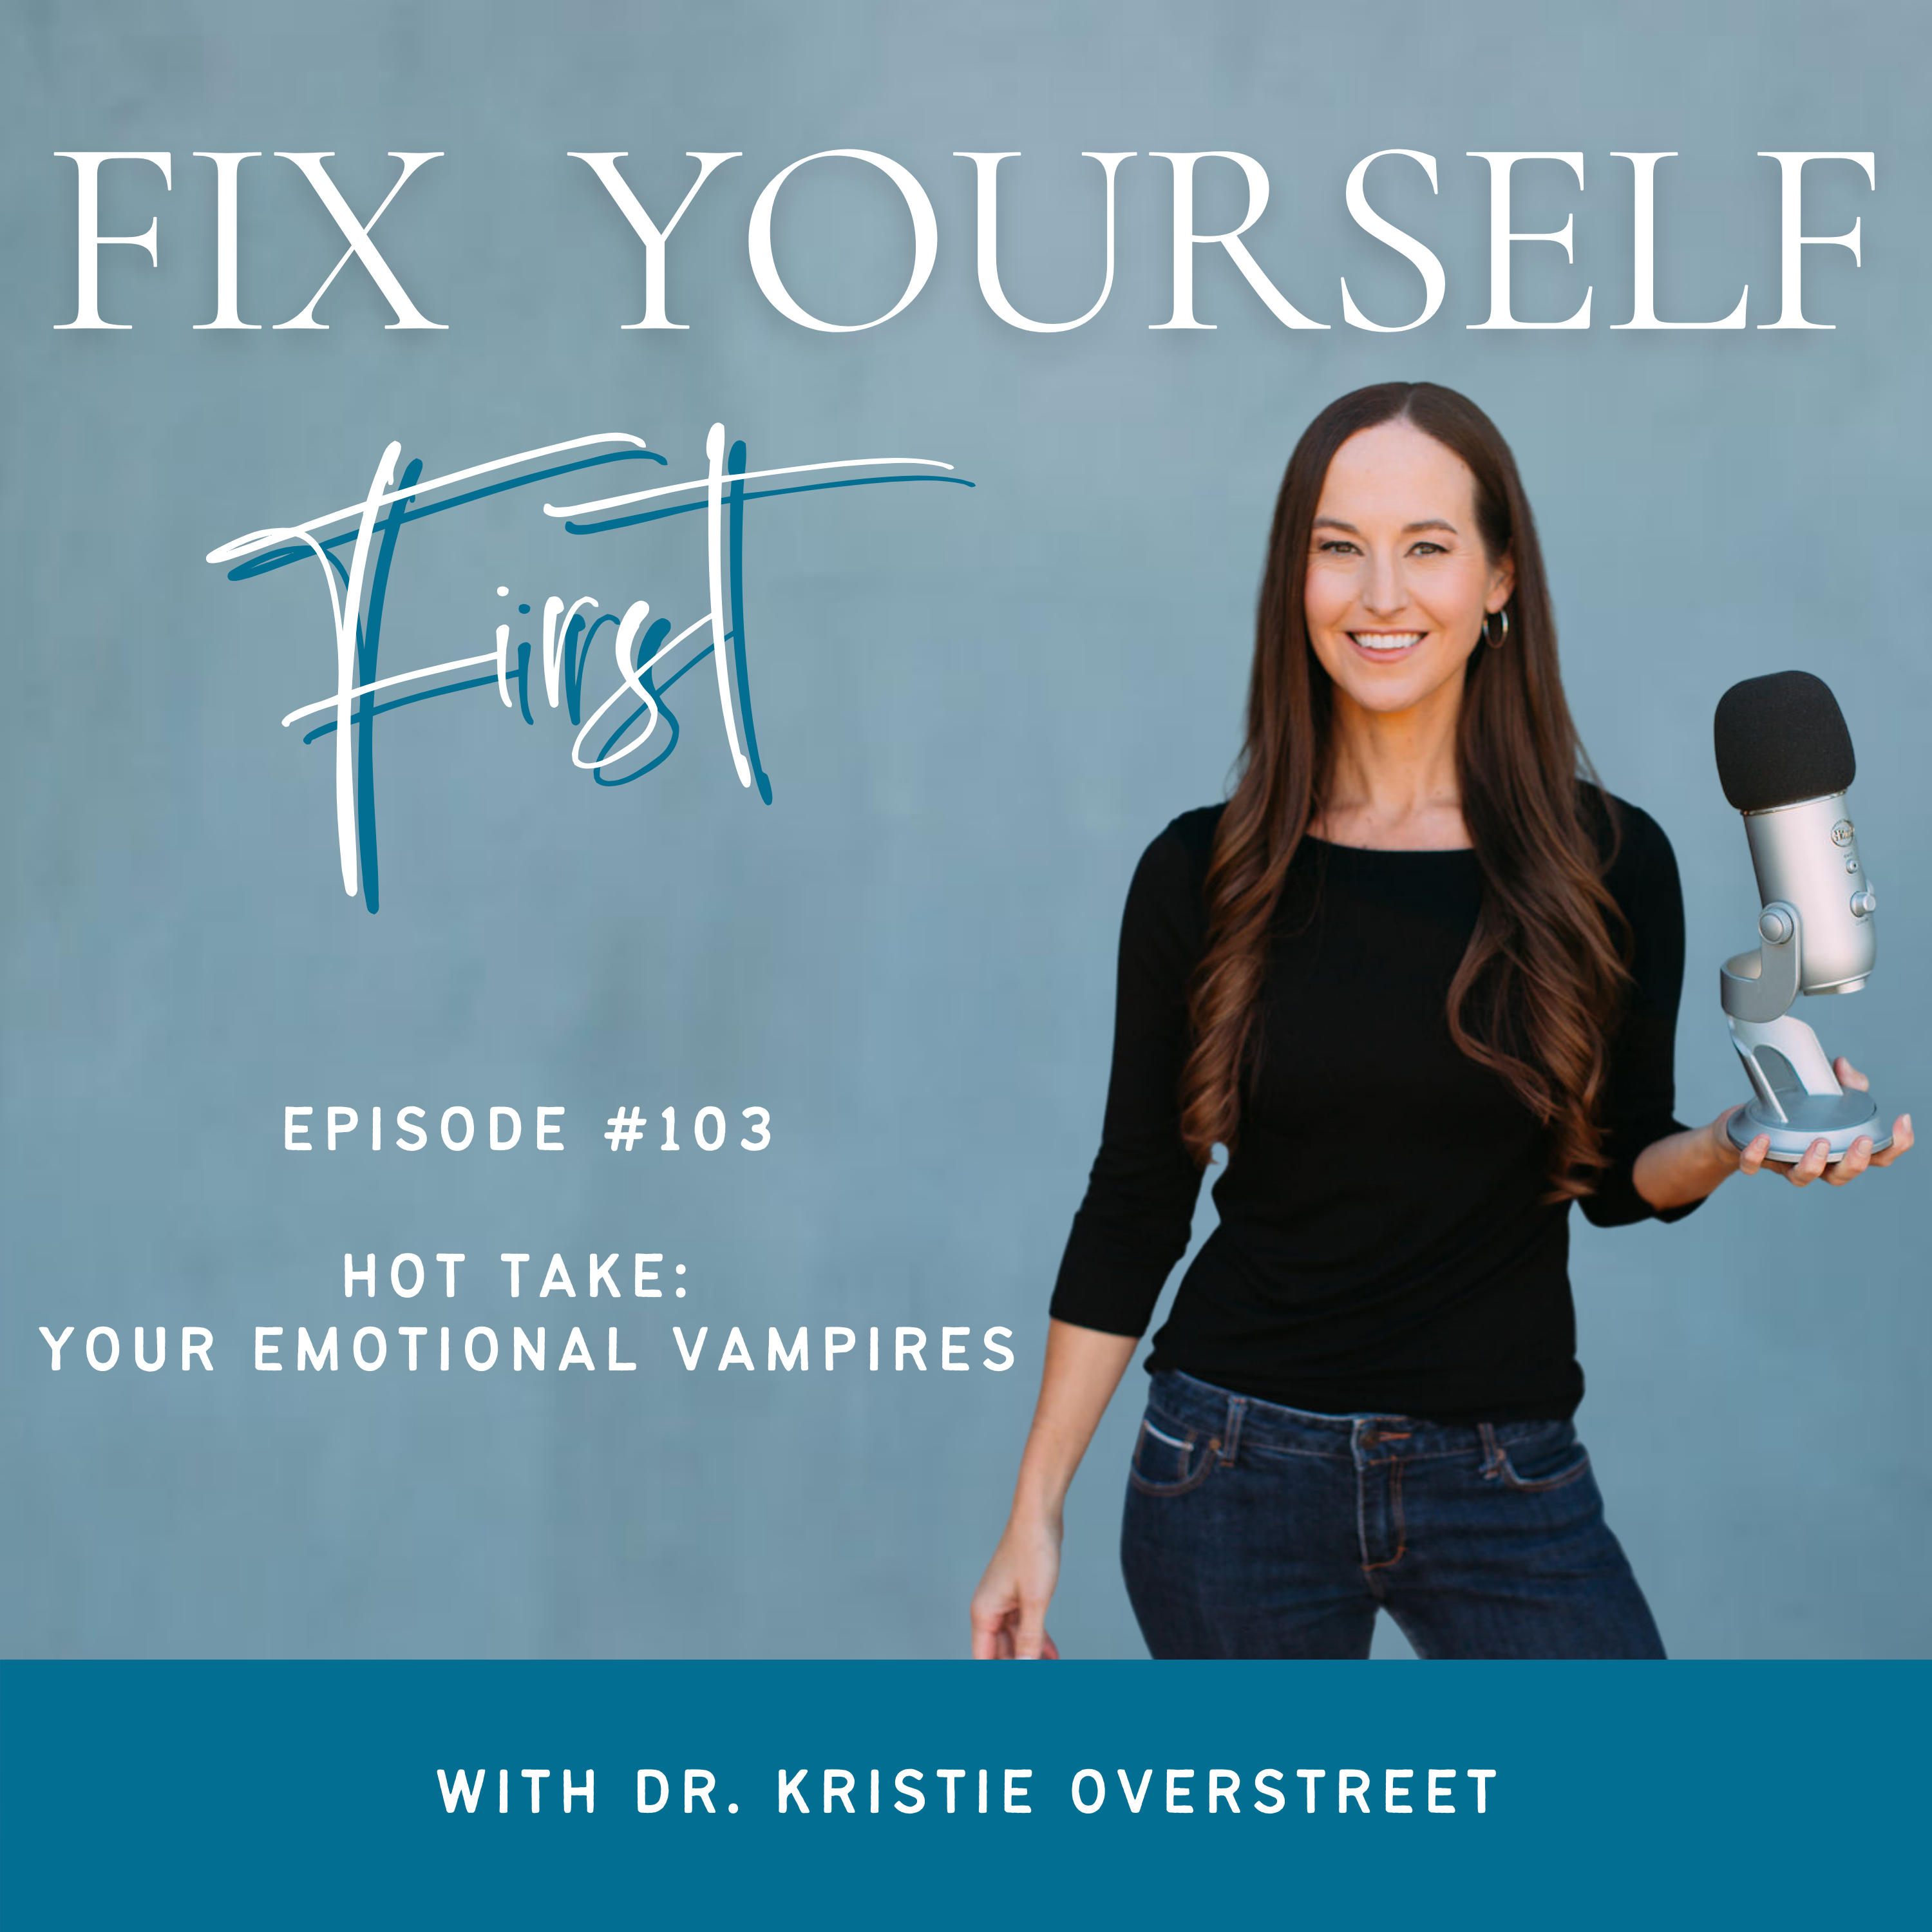 Fix Yourself First Episode 103 Hot Take: Your Emotional Vampires